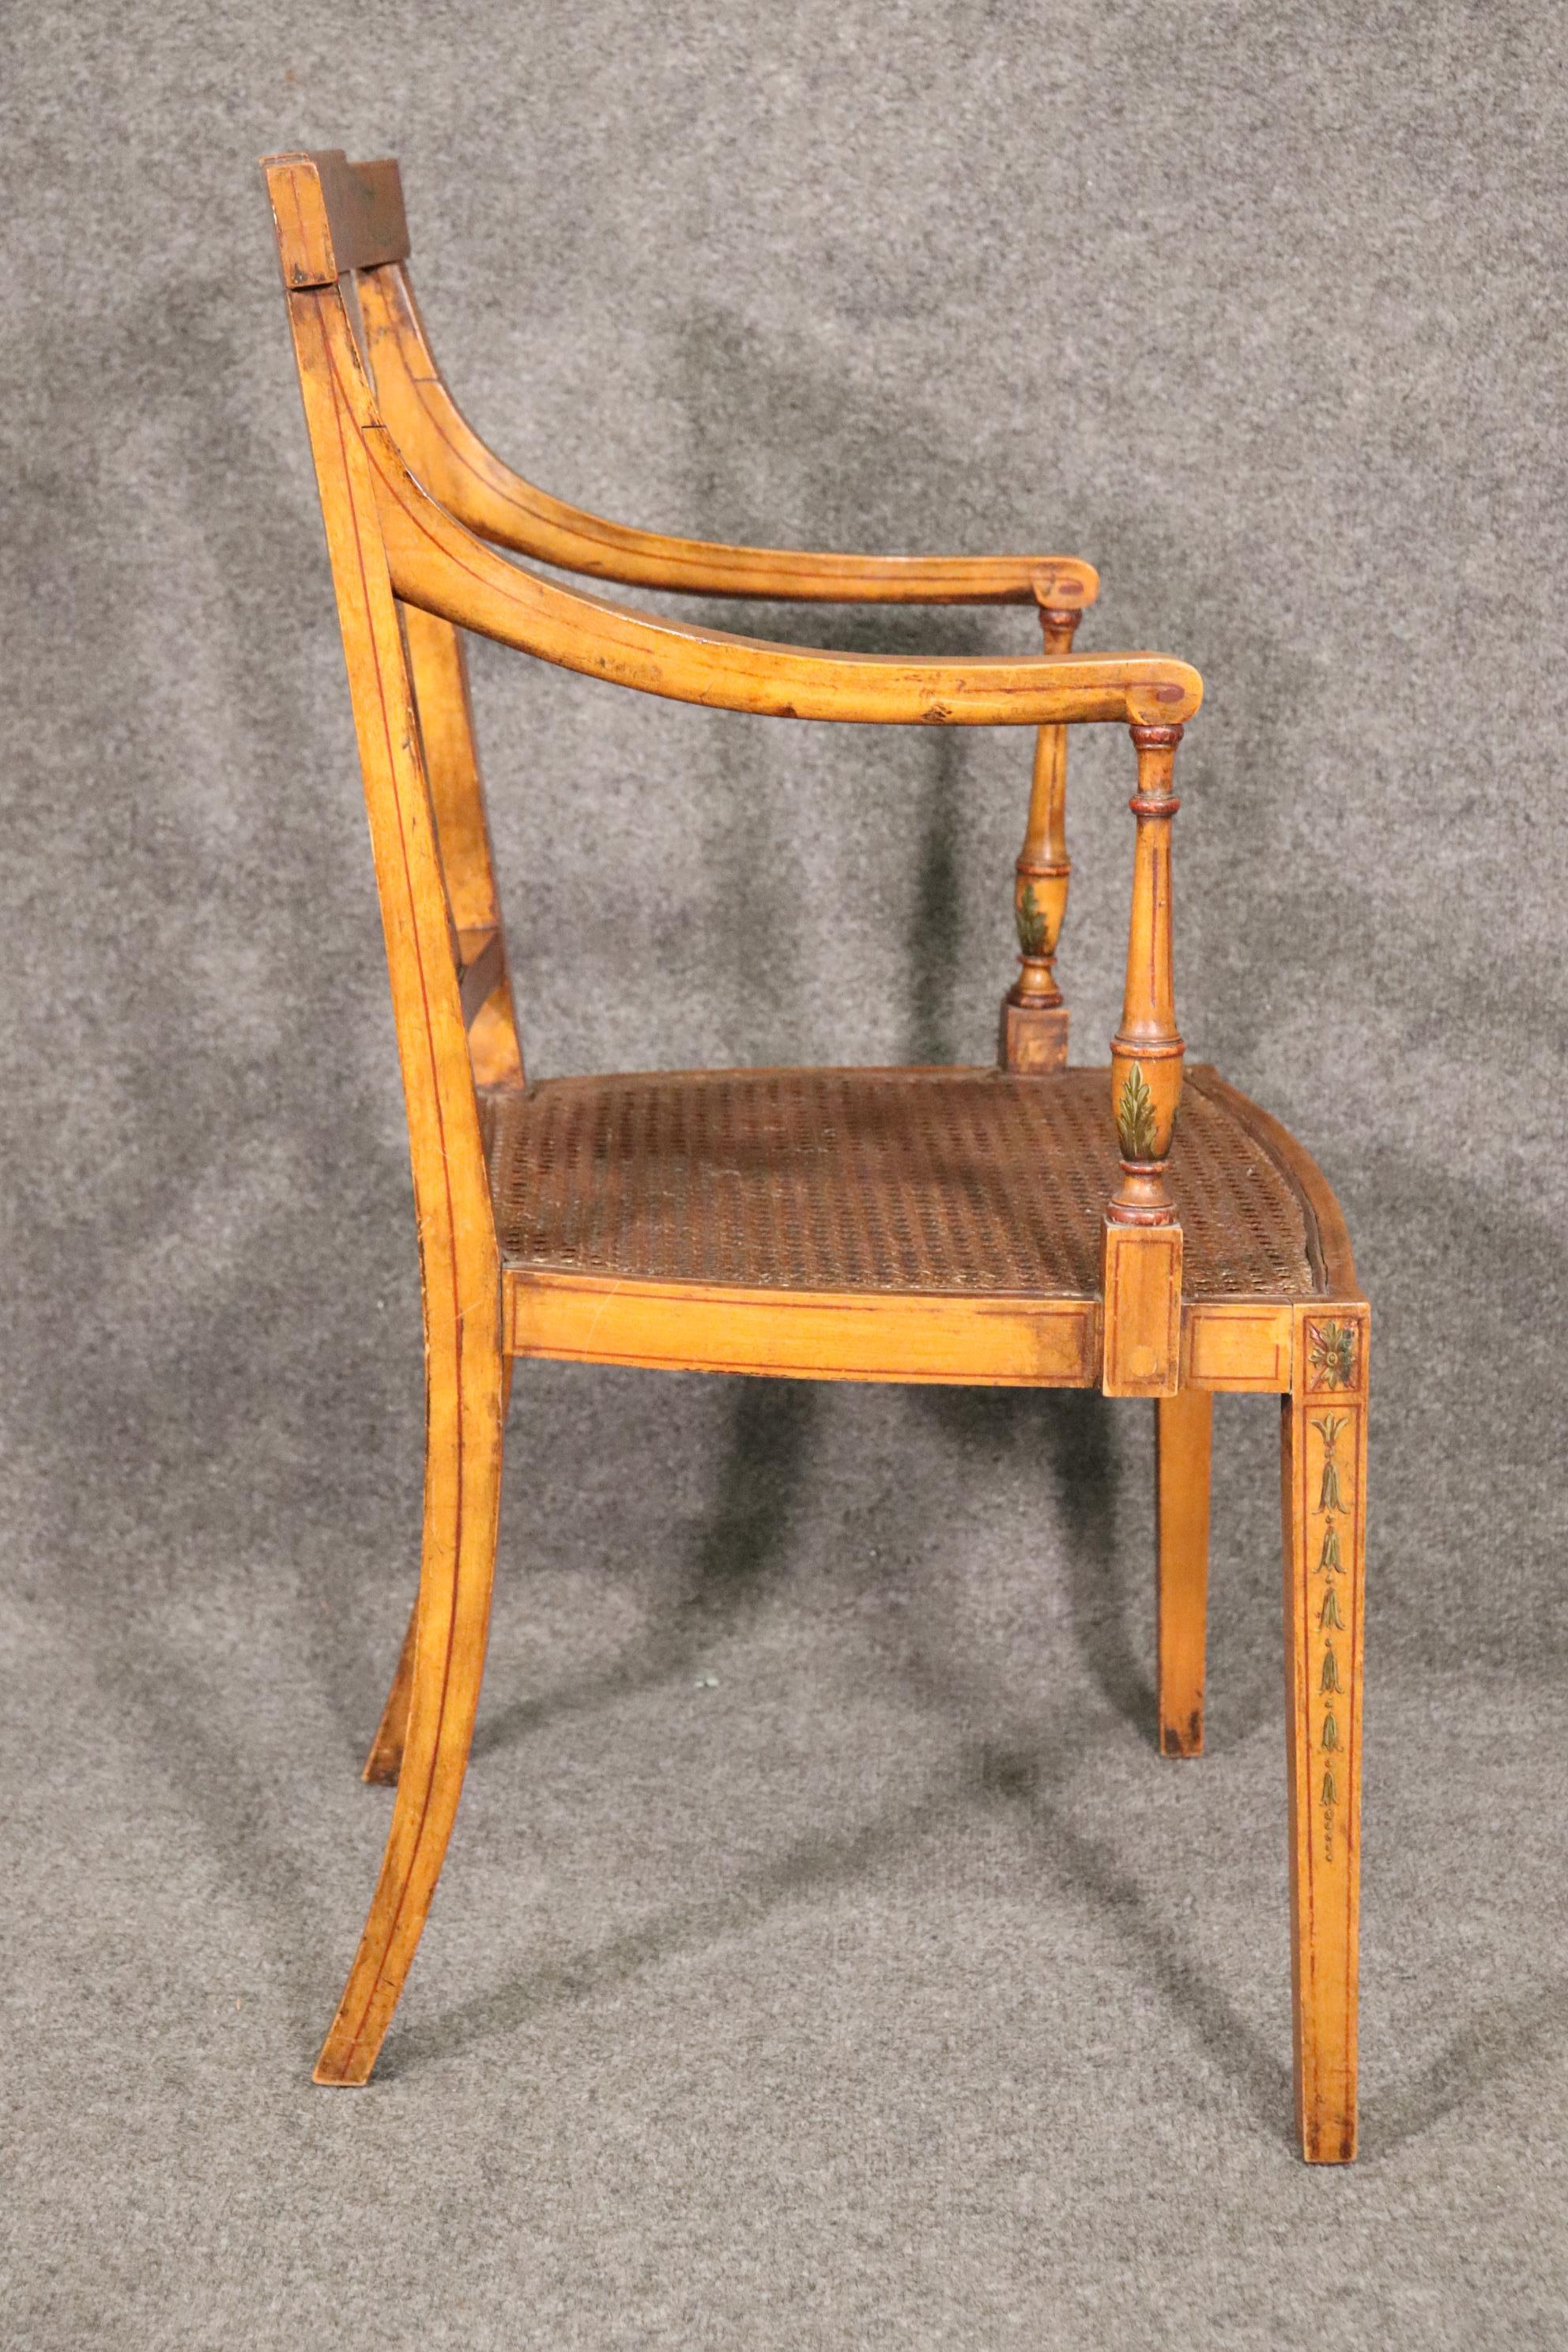 Fine Quality Paint Decorated English Satinwood Adams Cane Armchair Circa 1920 For Sale 2